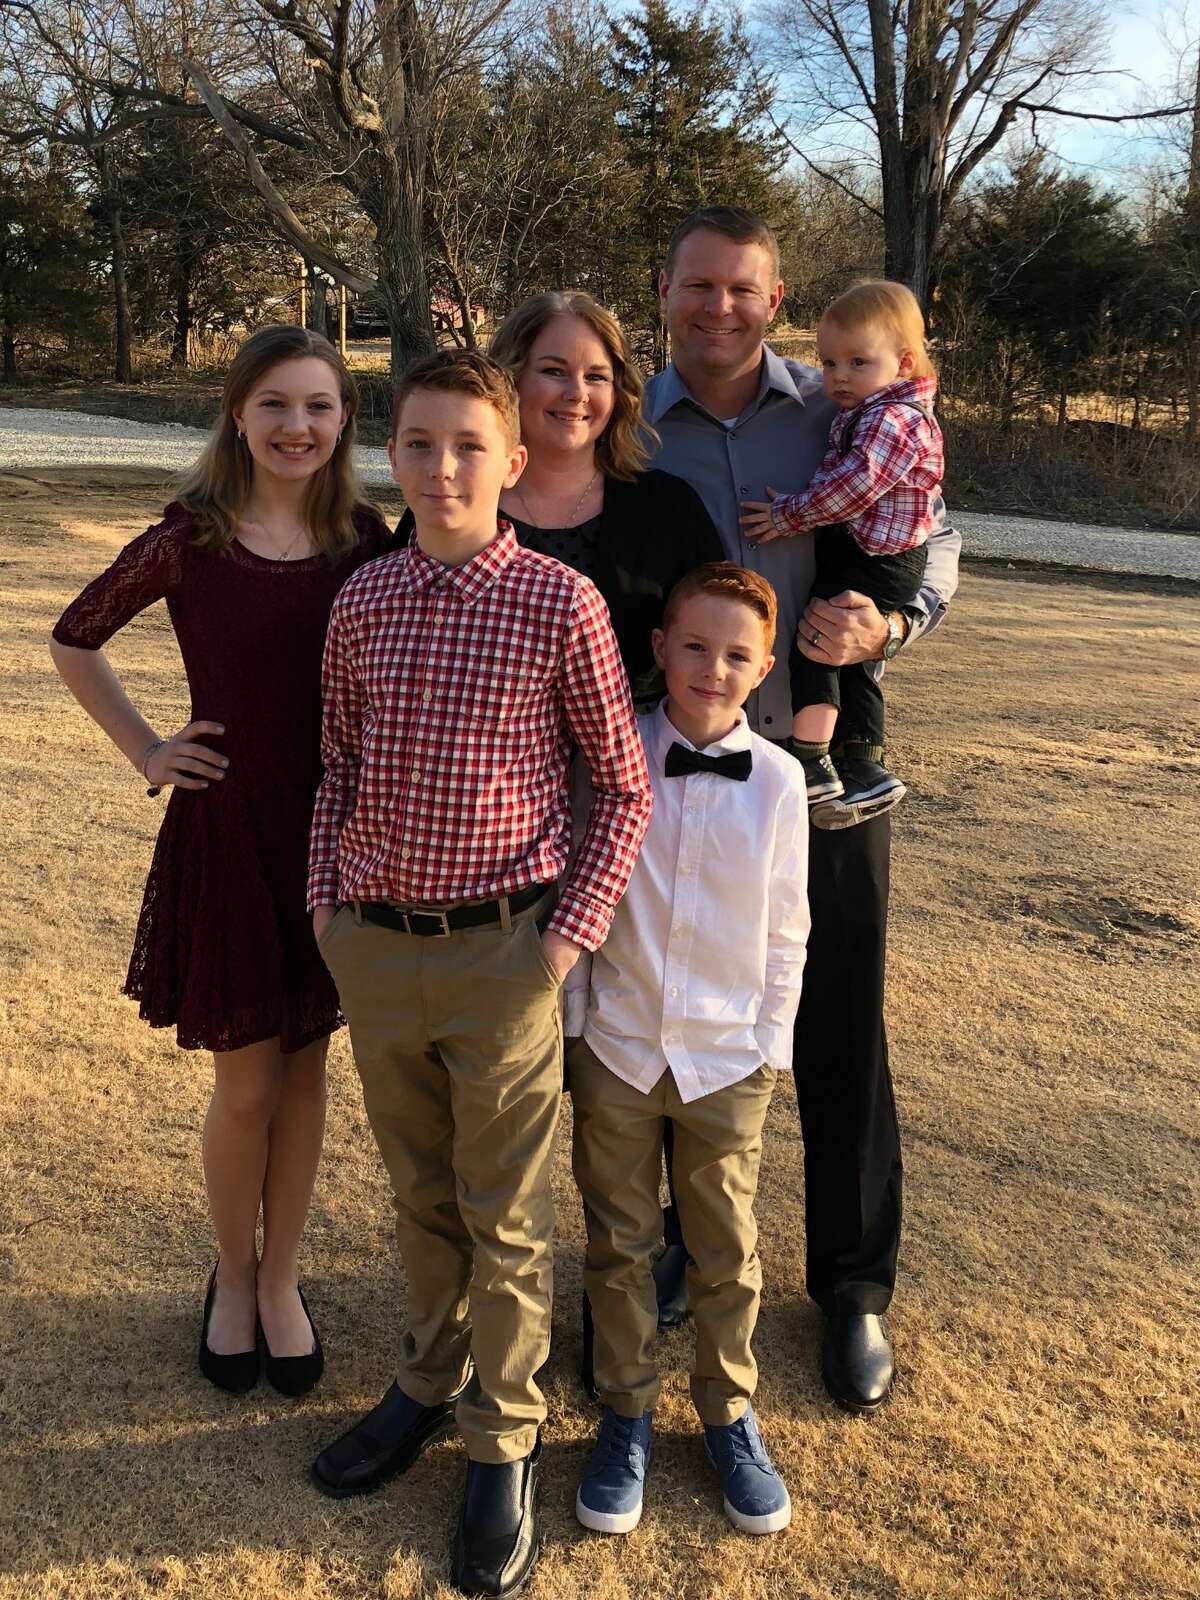 Mike Steele poses with his family (from left) daughter Margaret Grace, son Caleb, wife Lydia, son Merritt, and son Cullen.